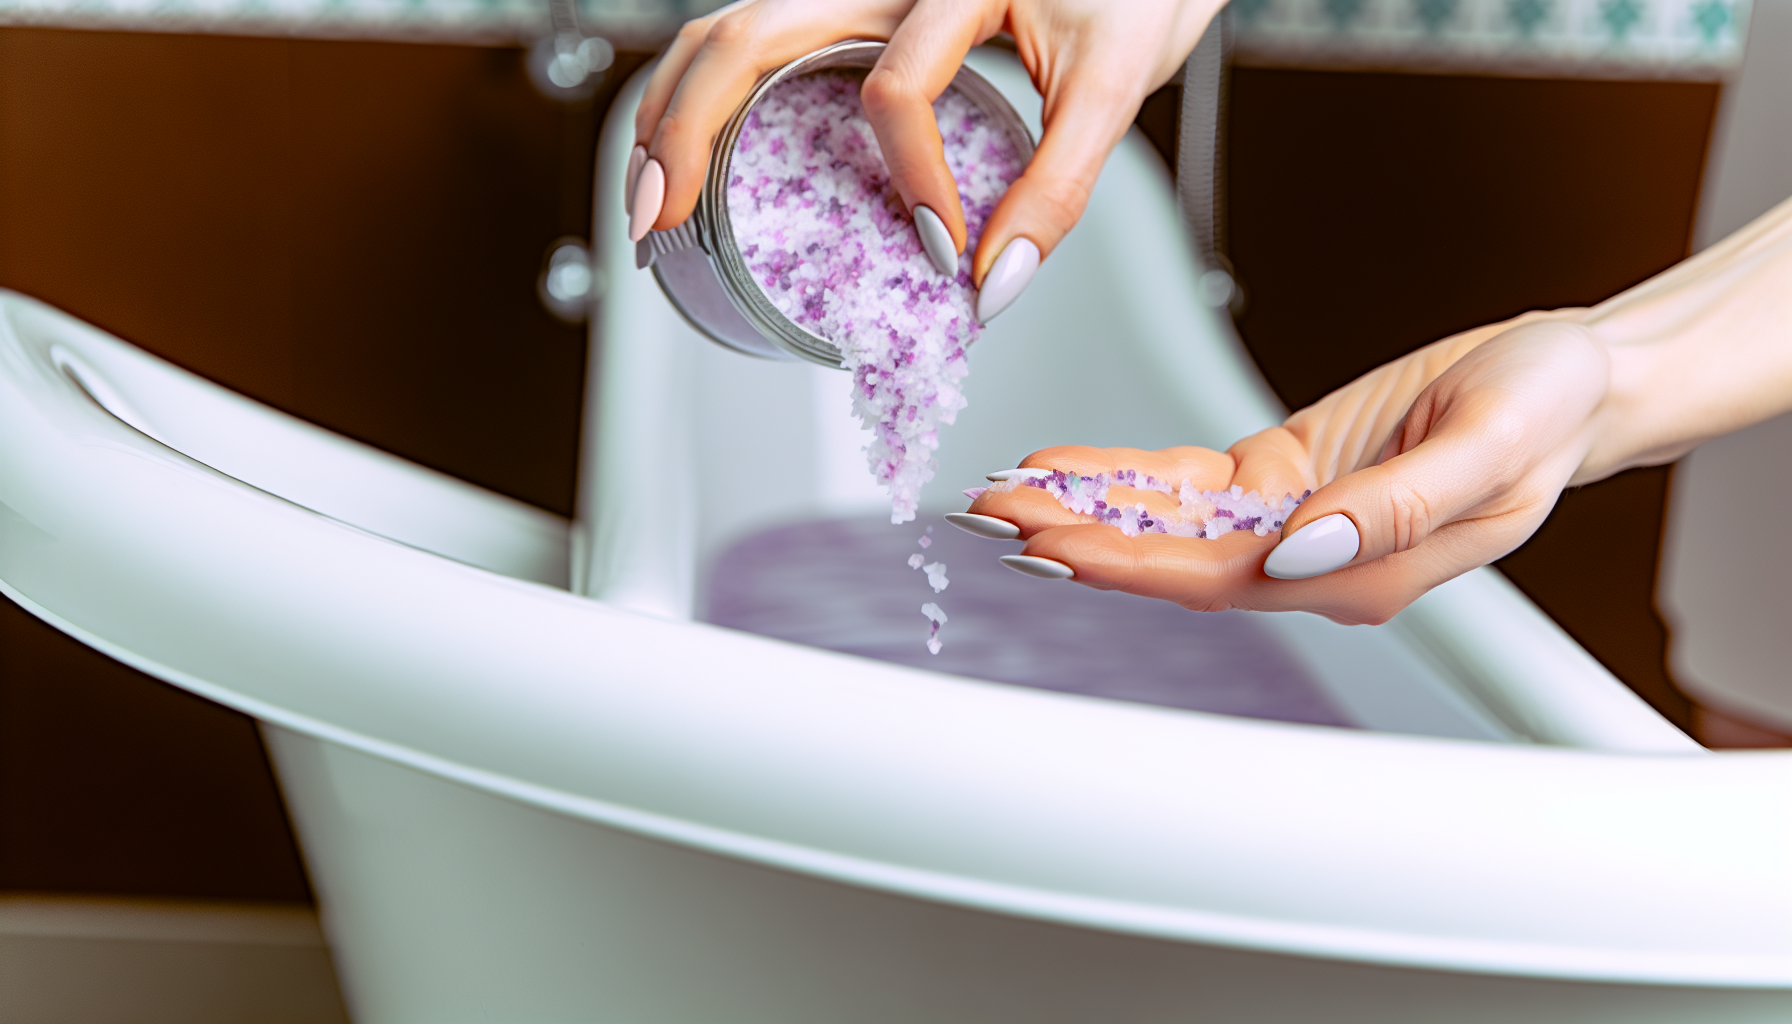 Close-up of a woman's hand pouring bath salts into a bathtub